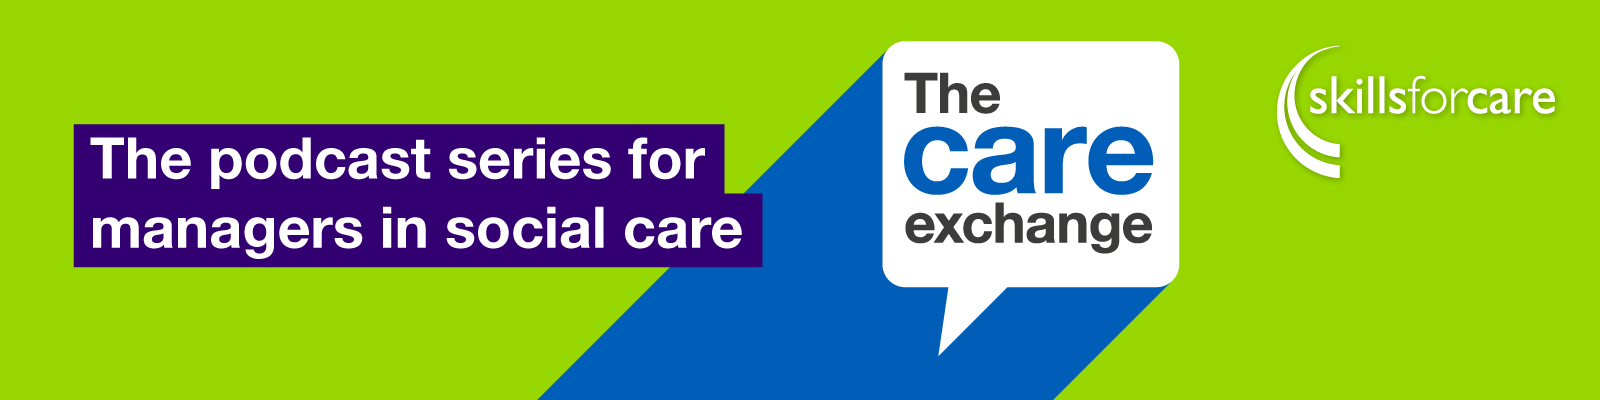 The care exchange from Skills for Care